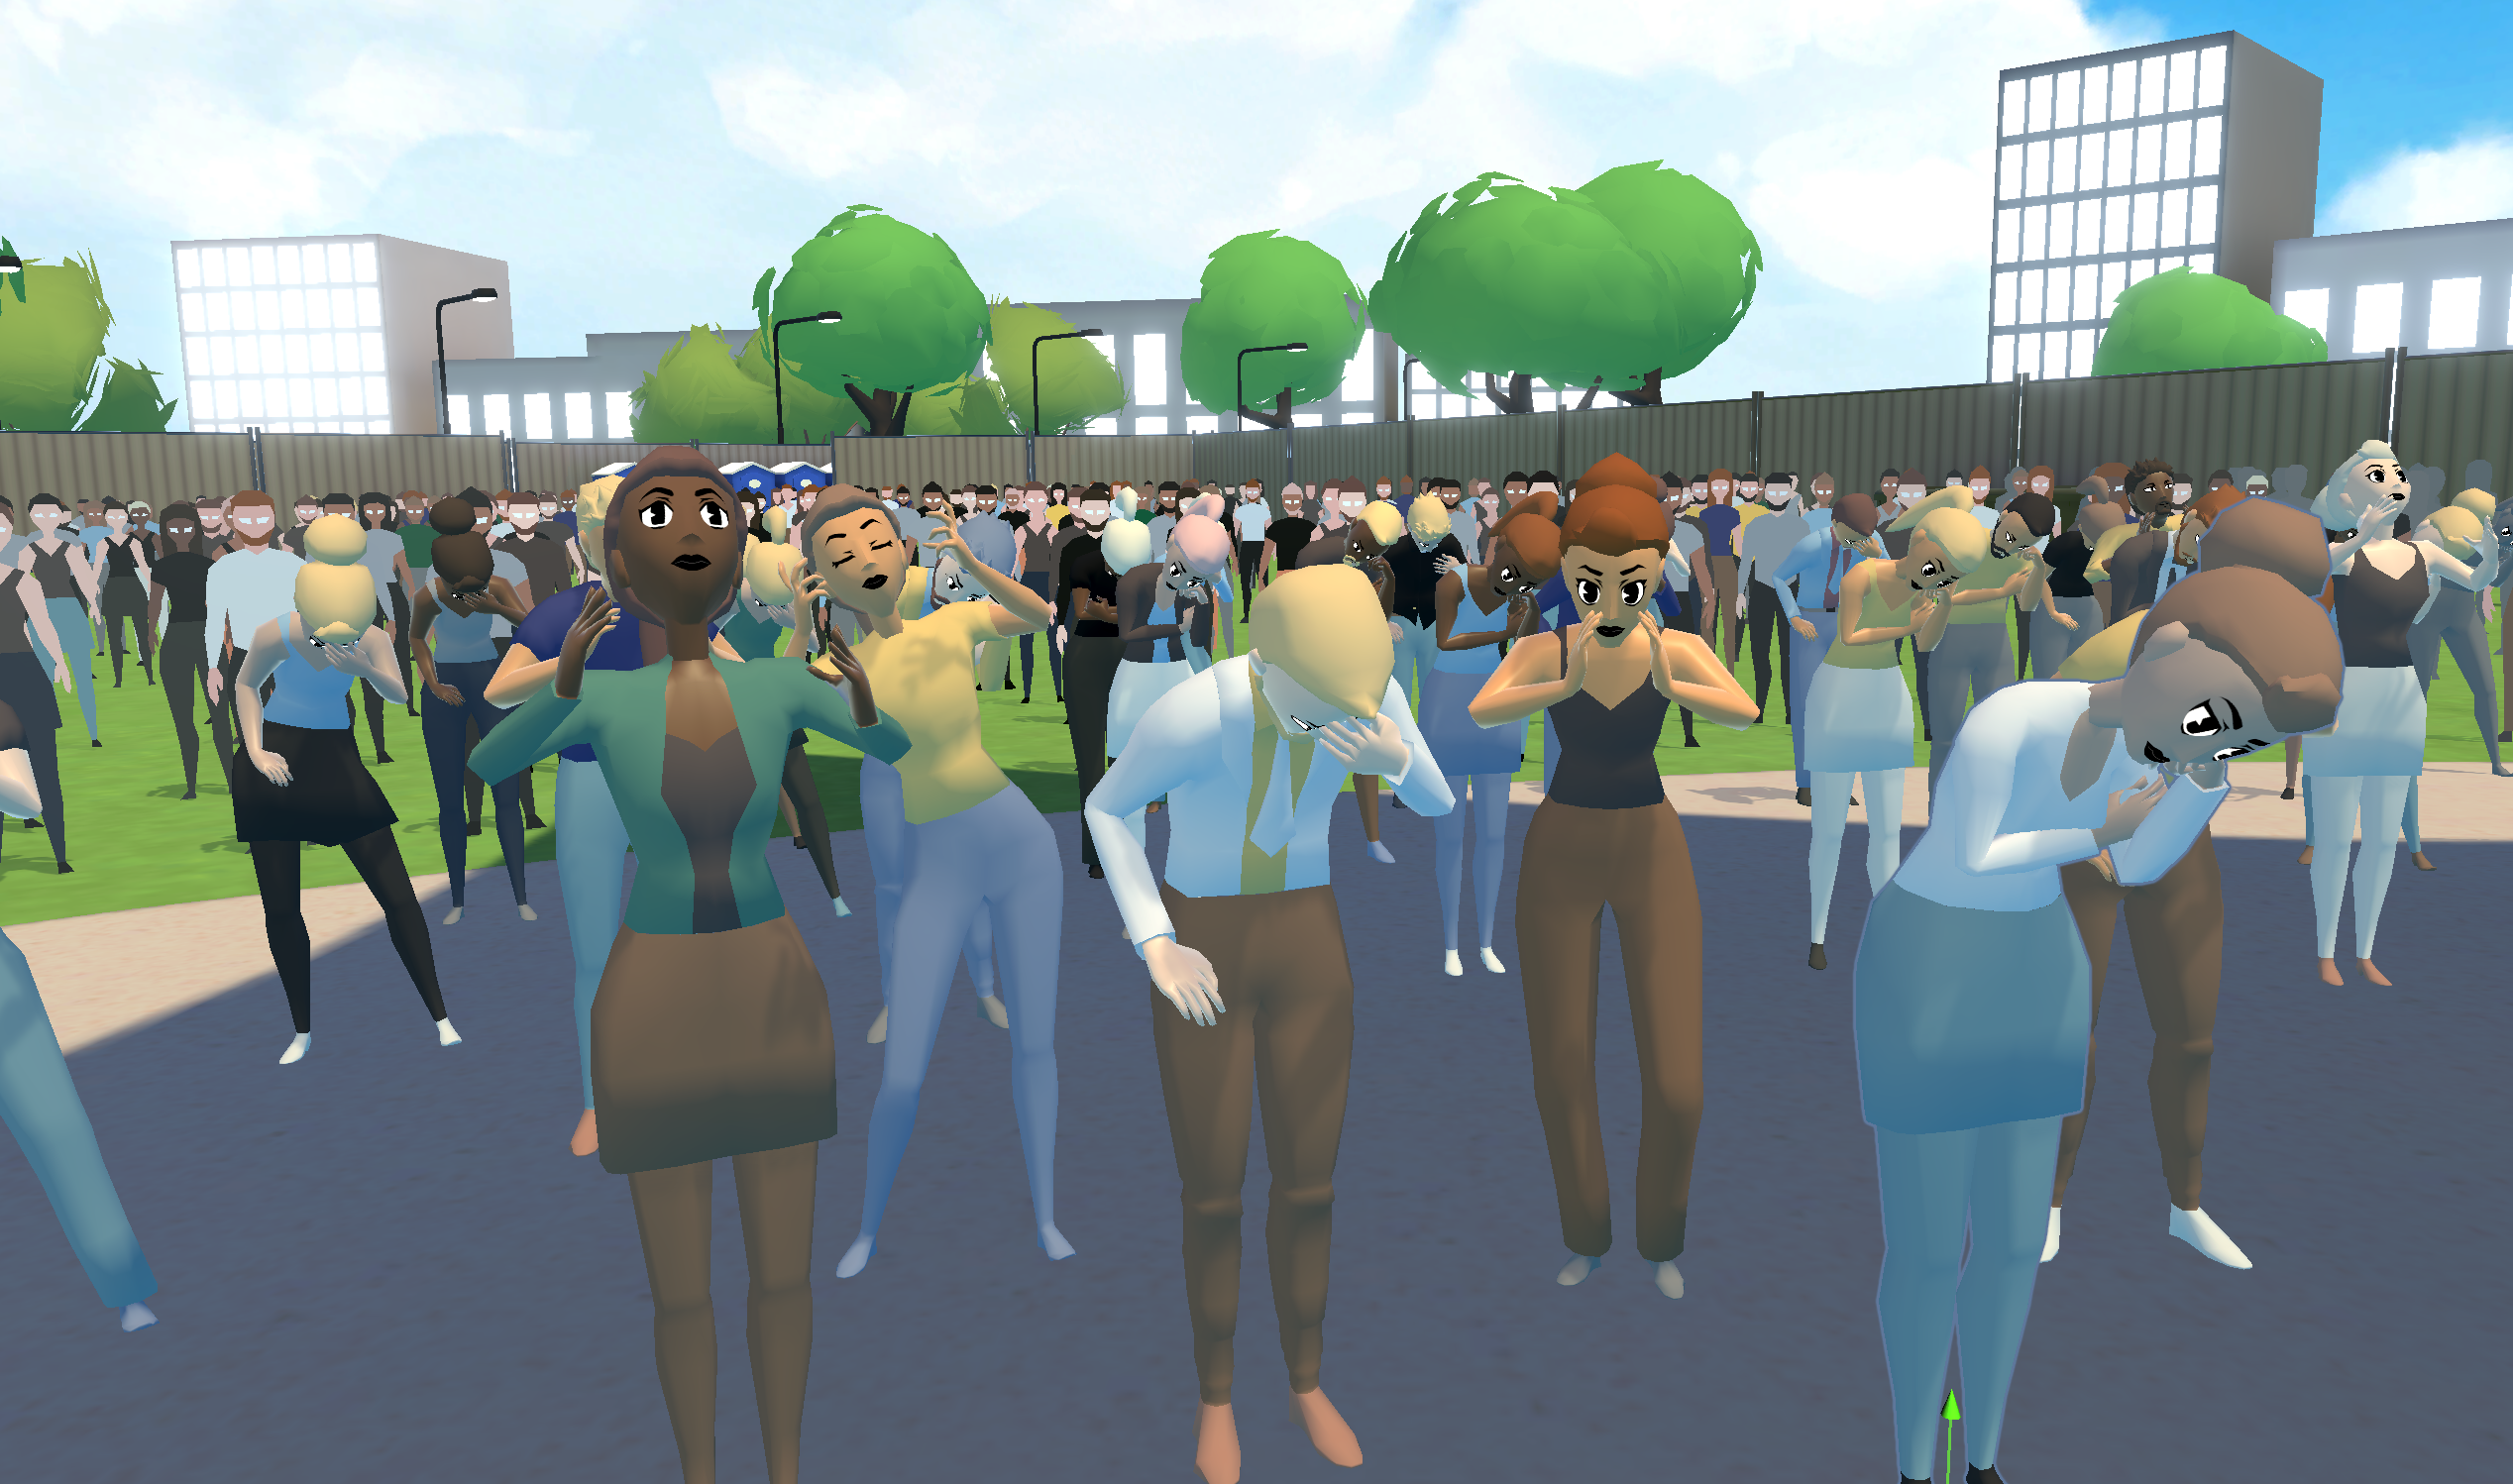 A screenshot of the audience in PedaXR - Presentation Simulation outdoor scene. The 3D avatar audience is booing at the speaker and facepalming. They seem frustrated and angry.